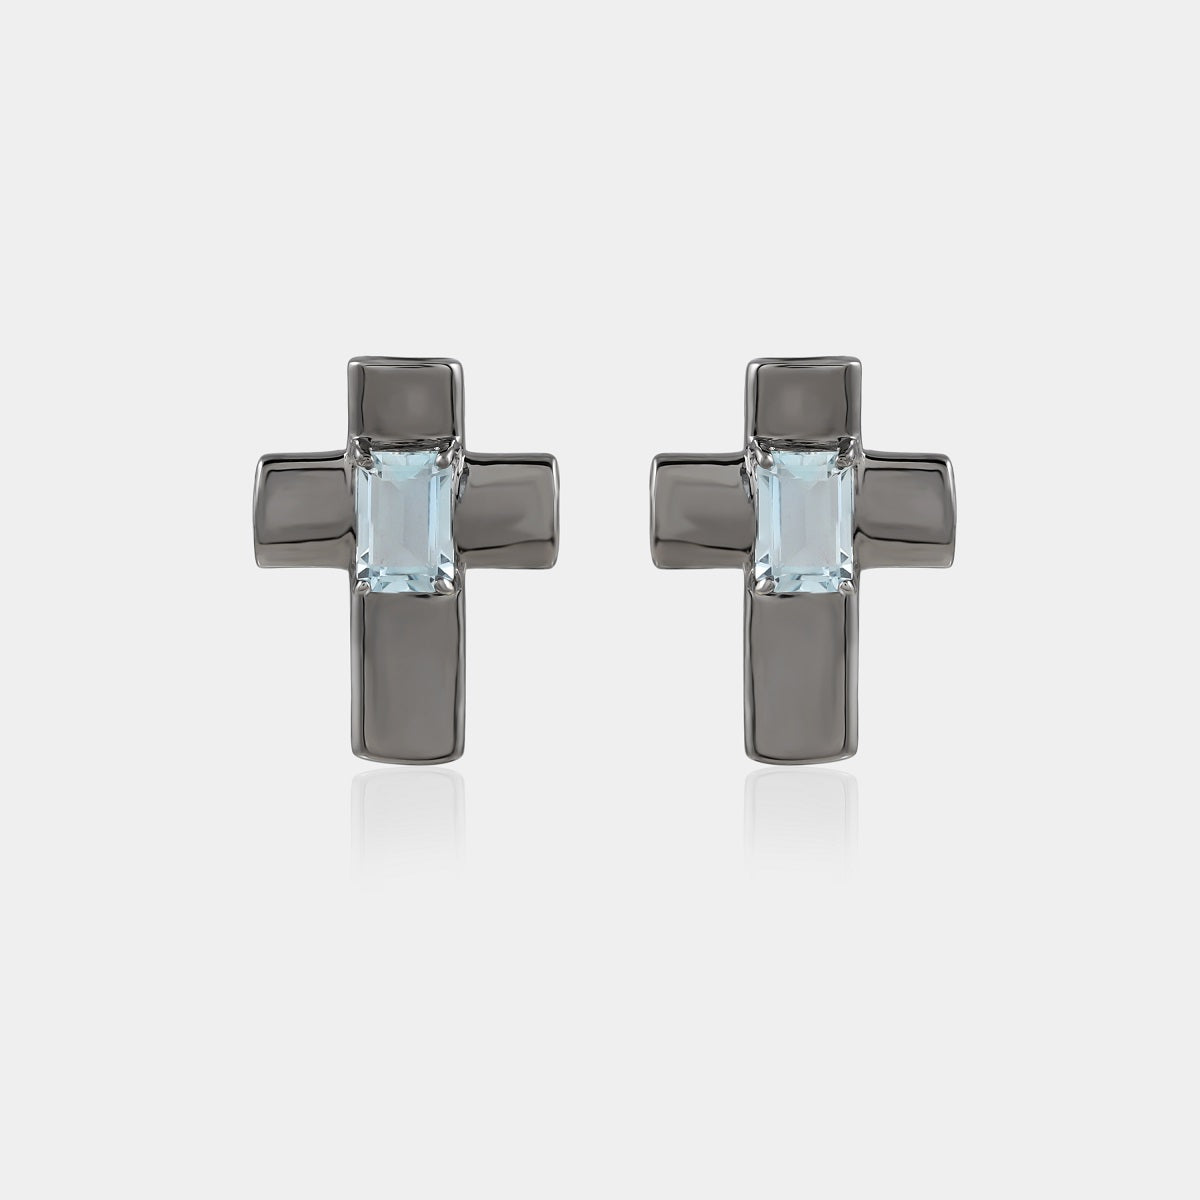 Detailed View of Blue Gemstone Octagon Studs